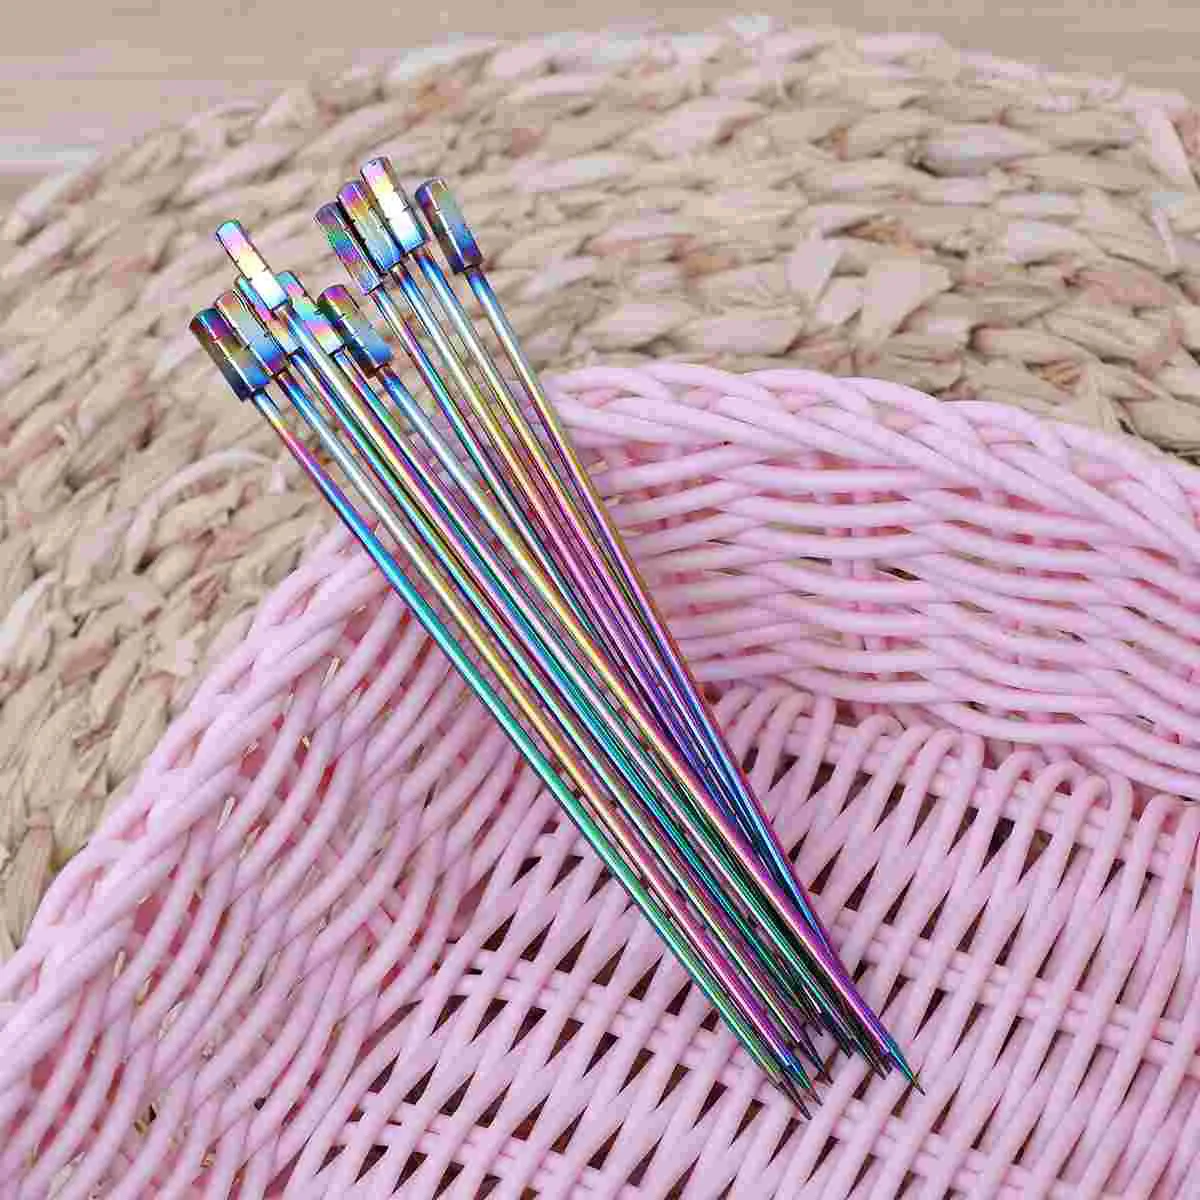 

10pcs Stainless Steel Cocktail Picks Fruit Sticks Toothpicks Appetizer Pick for Party Bar (Square Head) Cocteleria accessories